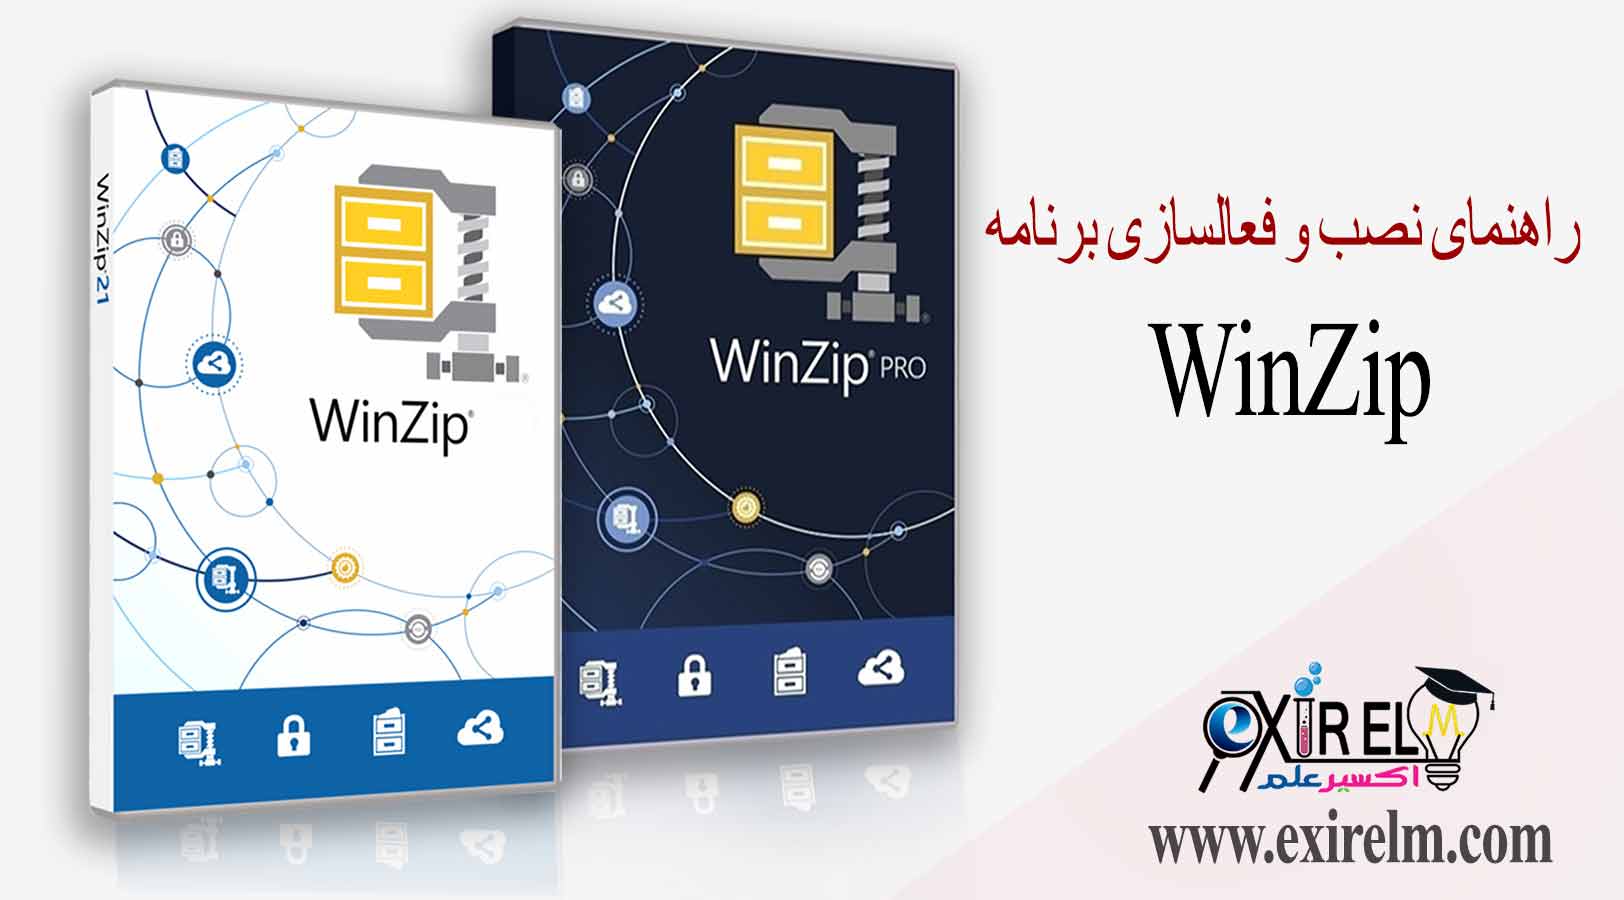 WinZip Pro 28.0.15620 instal the new version for ios